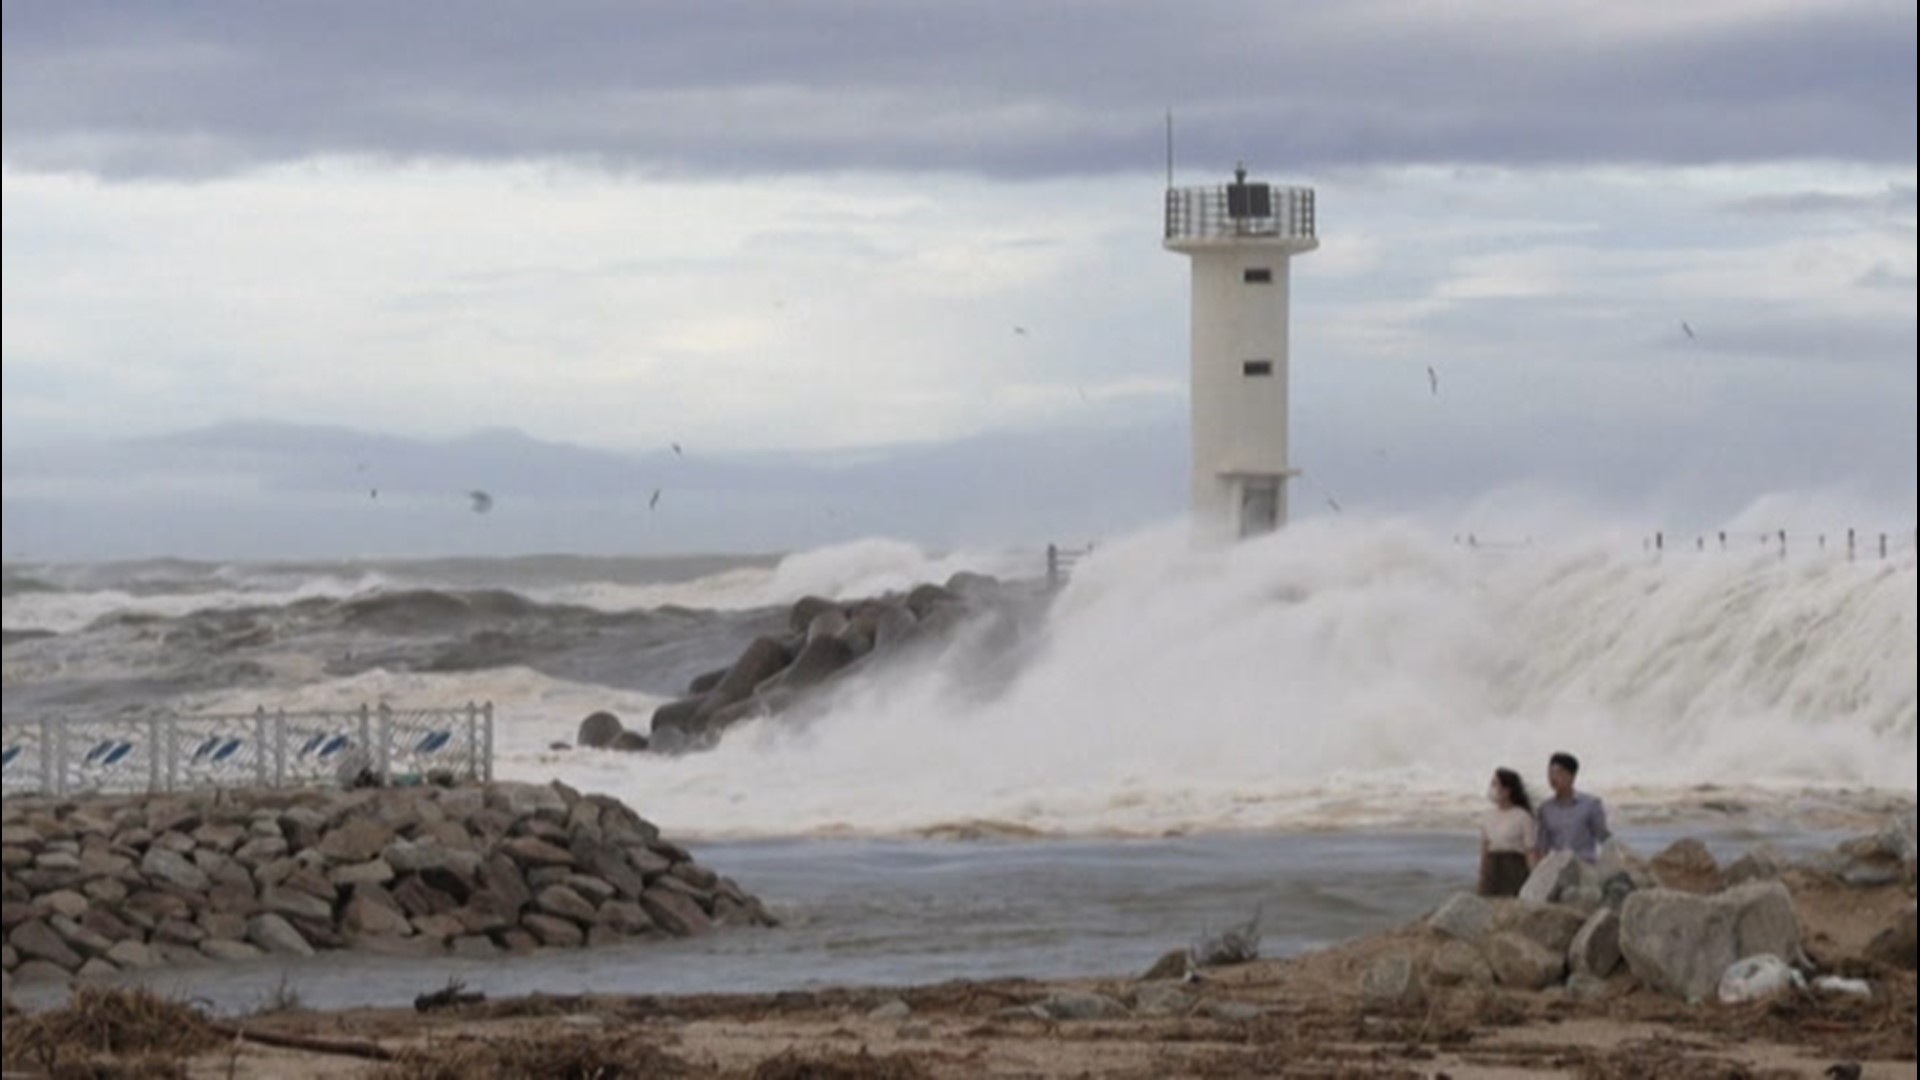 The coast along Sokcho, South Korea, was battered by waves on Sept. 7, as Typhoon Haishen lashed the area with powerful winds.